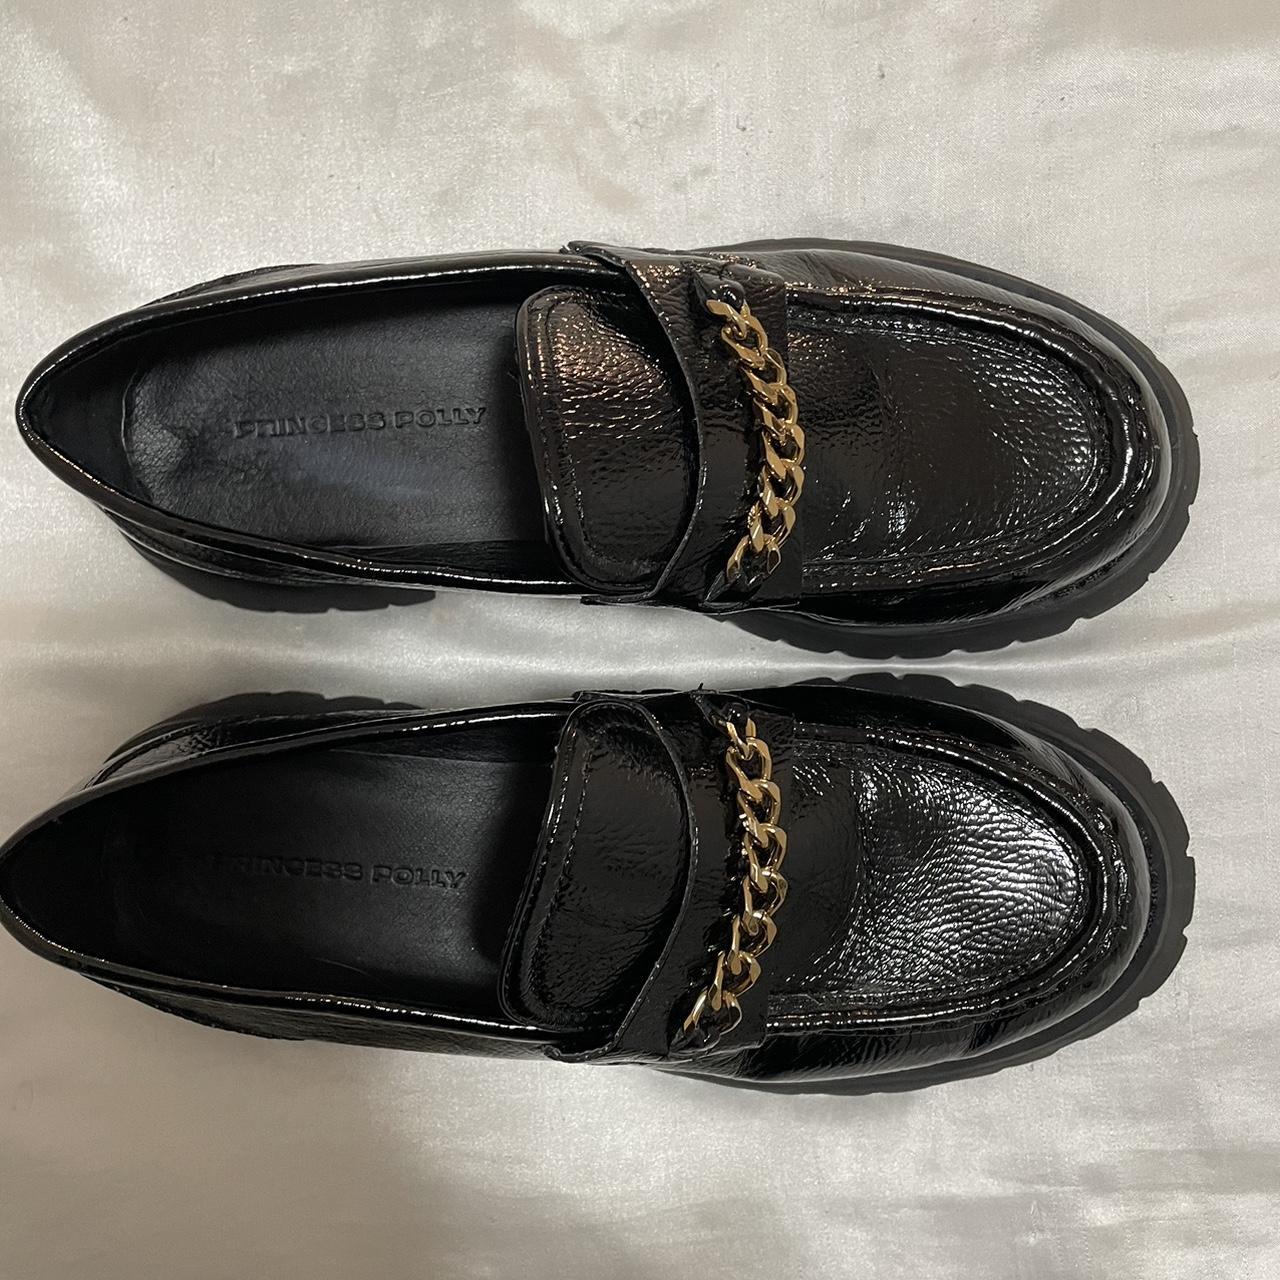 Princess Polly Women's Black and Gold Loafers | Depop